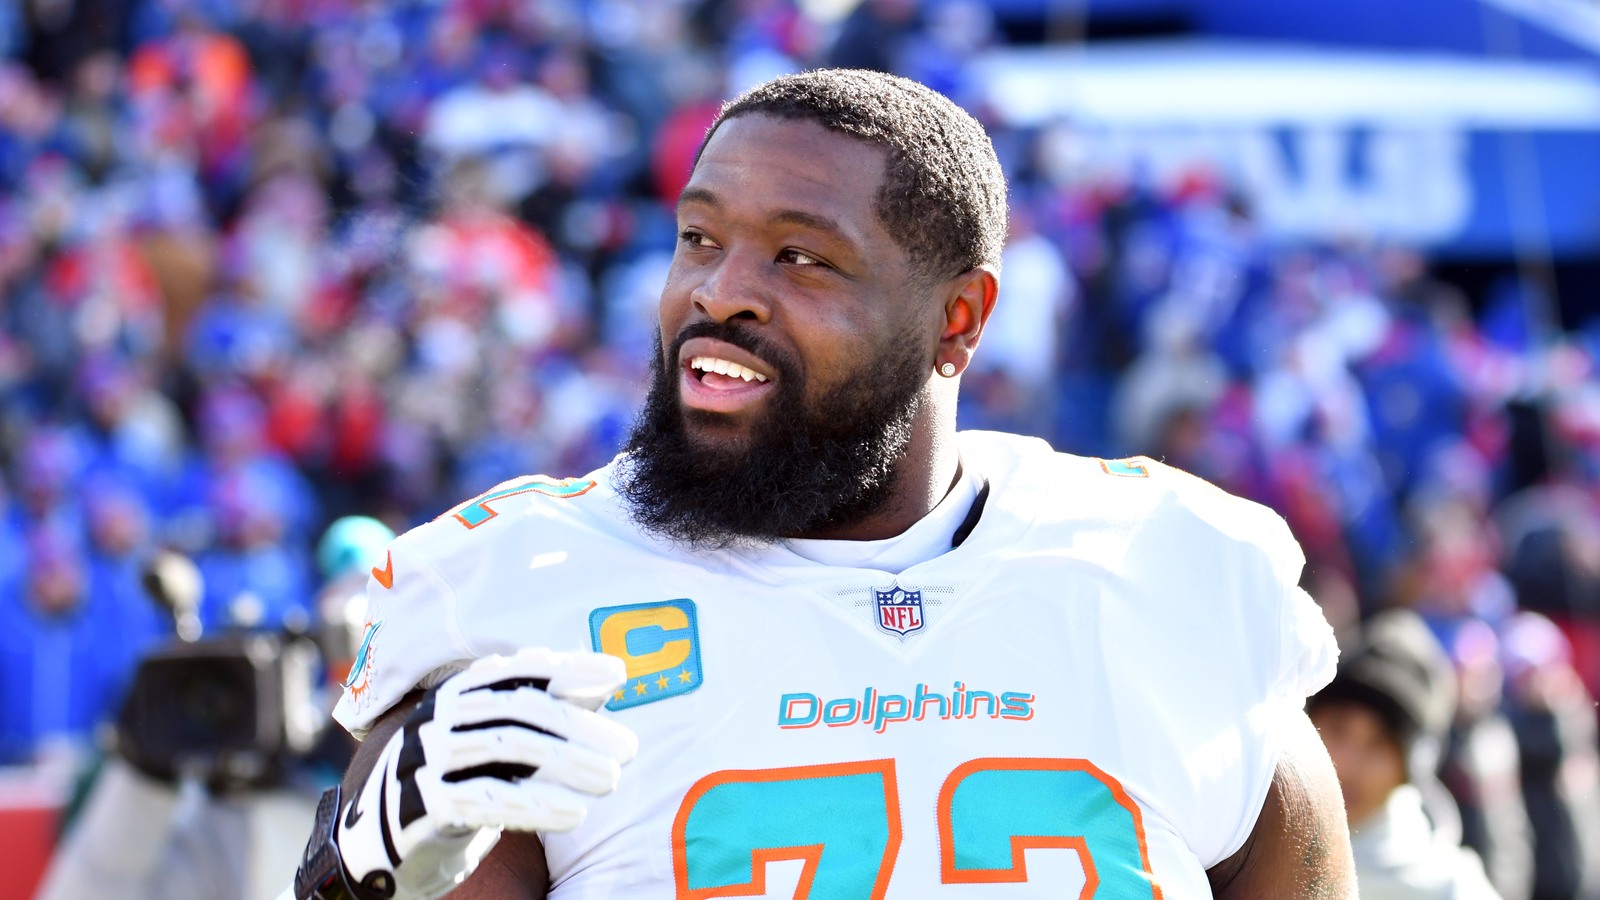 Report sheds light on future of Dolphins star LT Terron Armstead